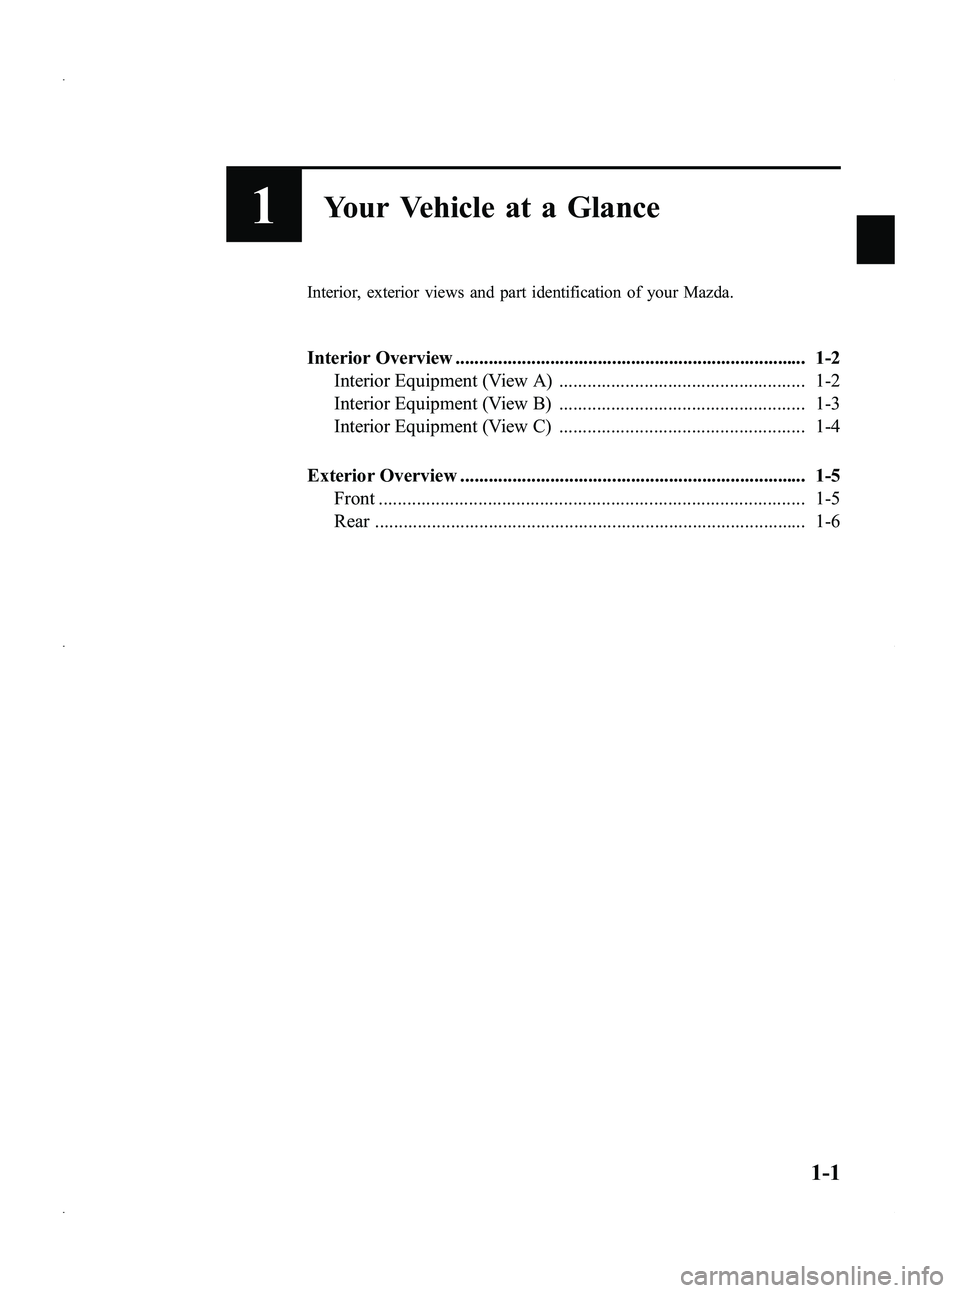 MAZDA MODEL 5 2013  Owners Manual Black plate (7,1)
1Your Vehicle at a Glance
Interior, exterior views and part identification of your Mazda.
Interior Overview ..........................................................................